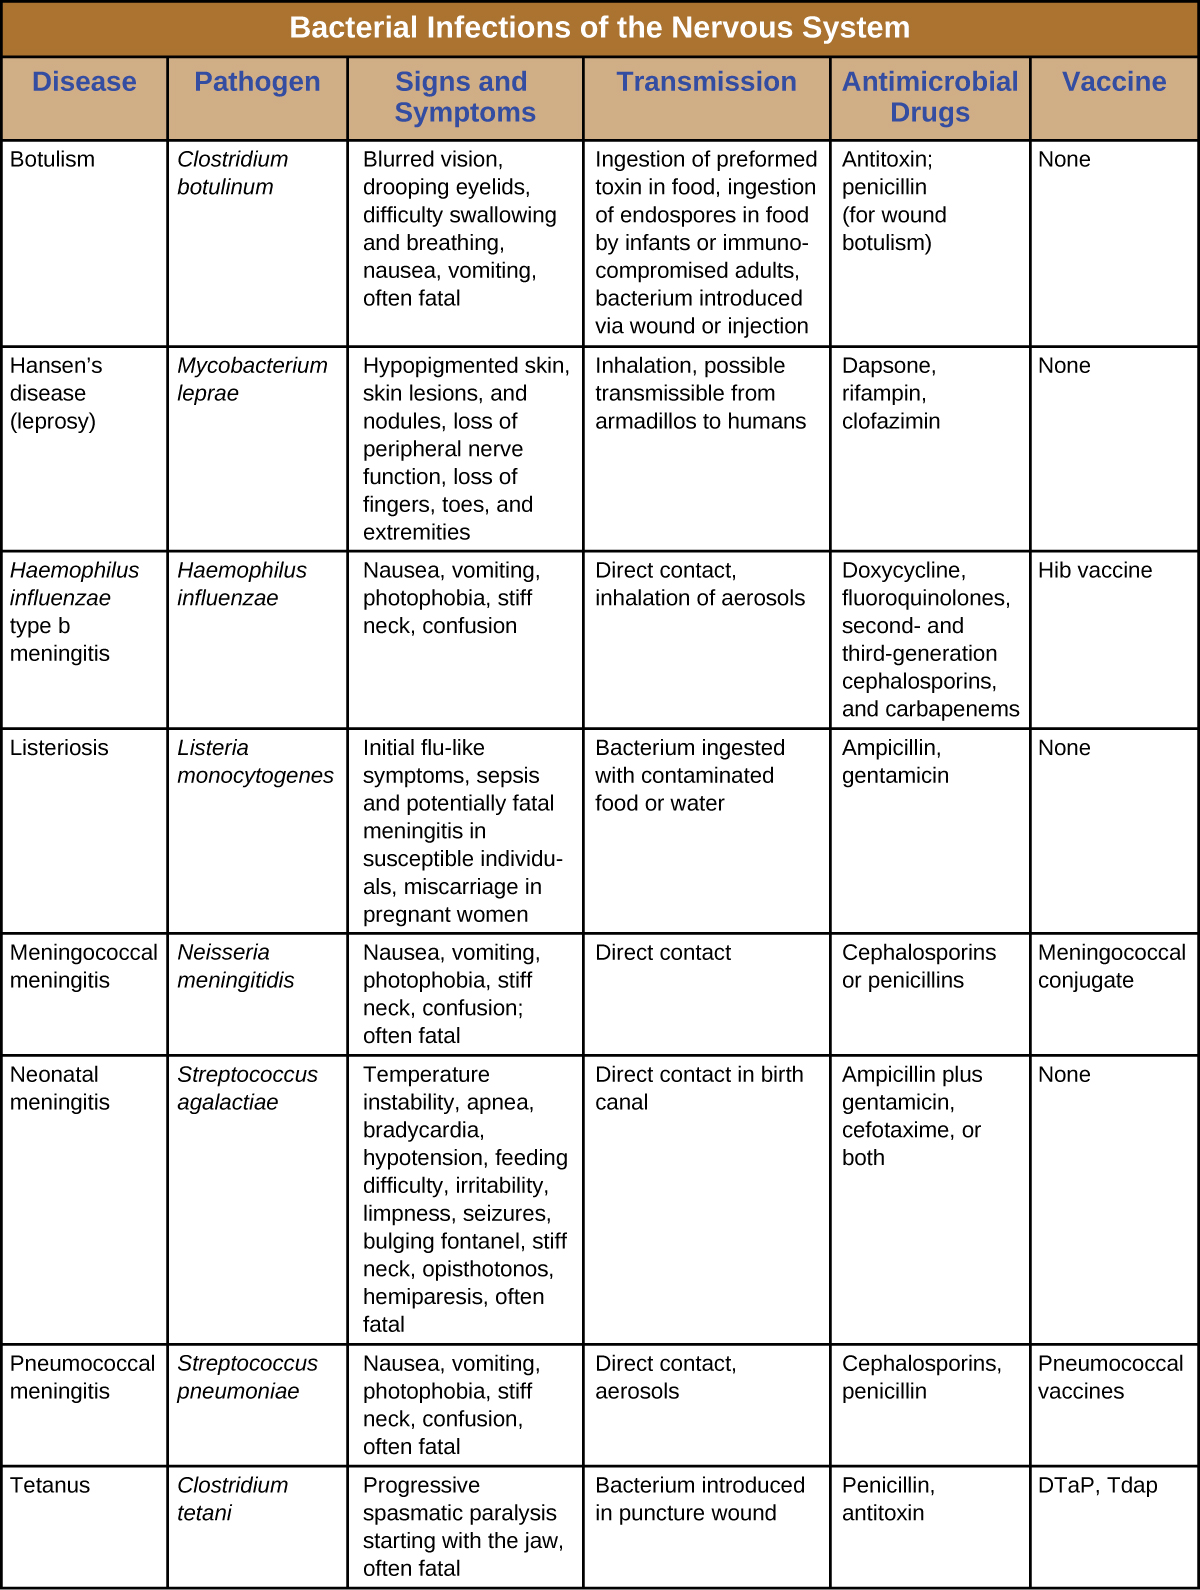 Table titled: Bacterial Infections of the Nervous System. Columns: Disease; Pathogen; Signs and Symptoms; Transmission; Antimicrobial Drugs; Vaccine. Disease: Botulism; Clostridium botulinum; Blurred vision, drooping eyelids, difficulty swallowing and breathing, nausea, vomiting,often fatal; Ingestion of preformed toxin in food, ingestion of endospores in food by infants or immunocompromised adults, bacterium introduced via wound or injection; Antitoxin; penicillin (for wound botulism)l; None. Disease: Hansen’s disease (leprosy); Mycobacterium leprae; Hypopigmented skin, skin lesions, and nodules, loss of peripheral nerve function, loss of fingers, toes, and extremities; Inhalation, possible transmissible from armadillos to humans; Dapsone, rifampin, clofazimin; None. Haemophilus influenzae type b meningitis; Haemophilus influenza; Nausea, vomiting, photophobia, stiff neck, confusion; Direct contact, inhalation of aerosols; Doxycycline, fluoroquinolones, second- and third-generation cephalosporins, and . carbapenems; Hib vaccine. Disease: Listeriosis; Listeria monocytogenes; Initial flu-like symptoms, sepsis and potentially fatal meningitis in susceptible individuals, miscarriage in pregnant women; Bacterium ingested with contaminated food or water; Ampicillin, gentamicin; None . Disease: Meningococcal meningitis; Neisseria meningitidis; Nausea, vomiting, photophobia, stiff neck, confusion; often fatal; Direct contact; Cephalosporins or penicillins; Meningococcal conjugate. Disease: Neonatal meningitis; Streptococcus agalactiae; Temperature instability, apnea, bradycardia, hypotension, feeding difficulty, irritability, limpness, seizures, bulging fontanel, stiff neck, opisthotonos, hemiparesis, often fatal; Direct contact in birth canal; Ampicillin plus gentamicin, cefotaxime, or both; None. Pneumococcal meningitis; Streptococcus pneumoniae; Nausea, vomiting, photophobia, stiff neck, confusion, often fatal; Direct contact, aerosols; Cephalosporins, penicillin; Pneumococcal vaccines. Disease: Tetanus; Clostridium tetani; Progressive spasmatic paralysis starting with the jaw, often fatal; Bacterium introduced in puncture wound; Penicillin, antitoxin; DTaP, Tdap.